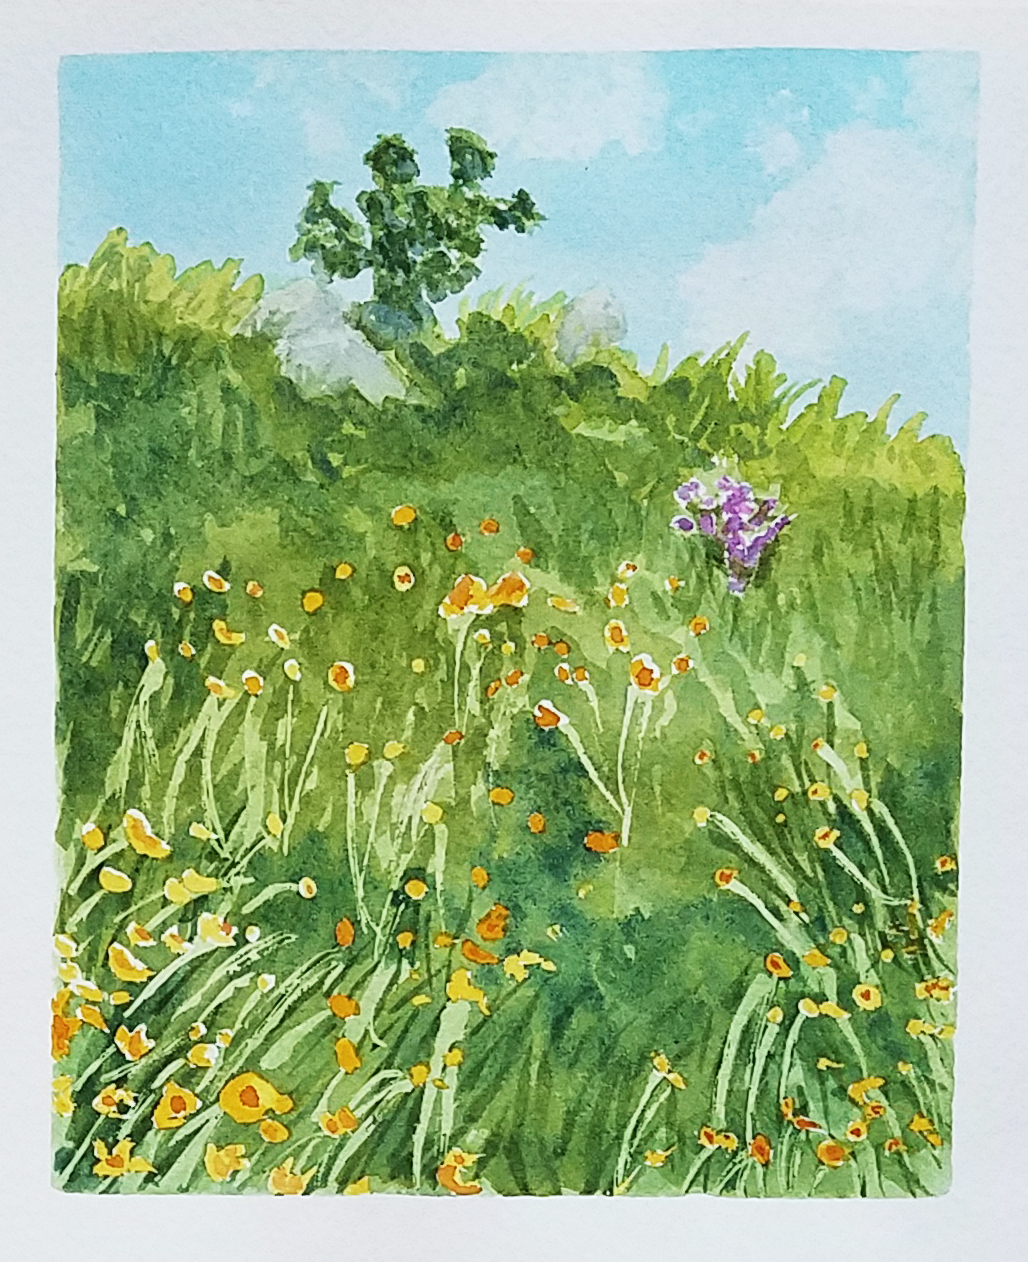 Field / Watercolor on paper / 5 x 7 inches / 2019